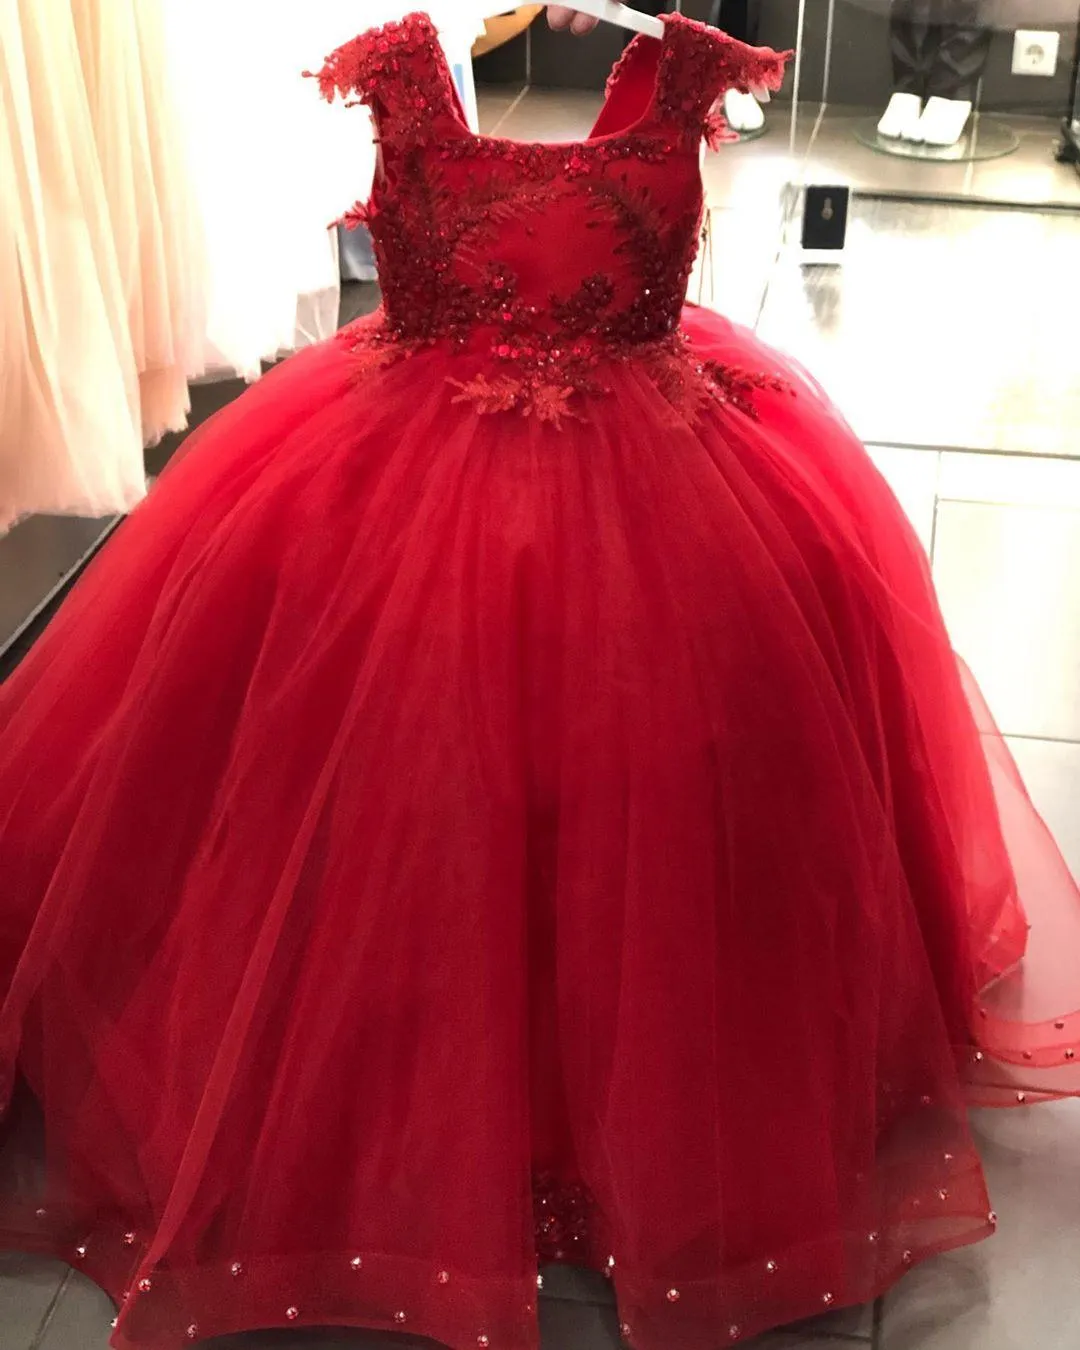 2020 Red Lace Beaded Flower Girl Dresses Cheap Ball Gown Little Girl Wedding Dresses Cheap Communion Pageant Dresses Gowns